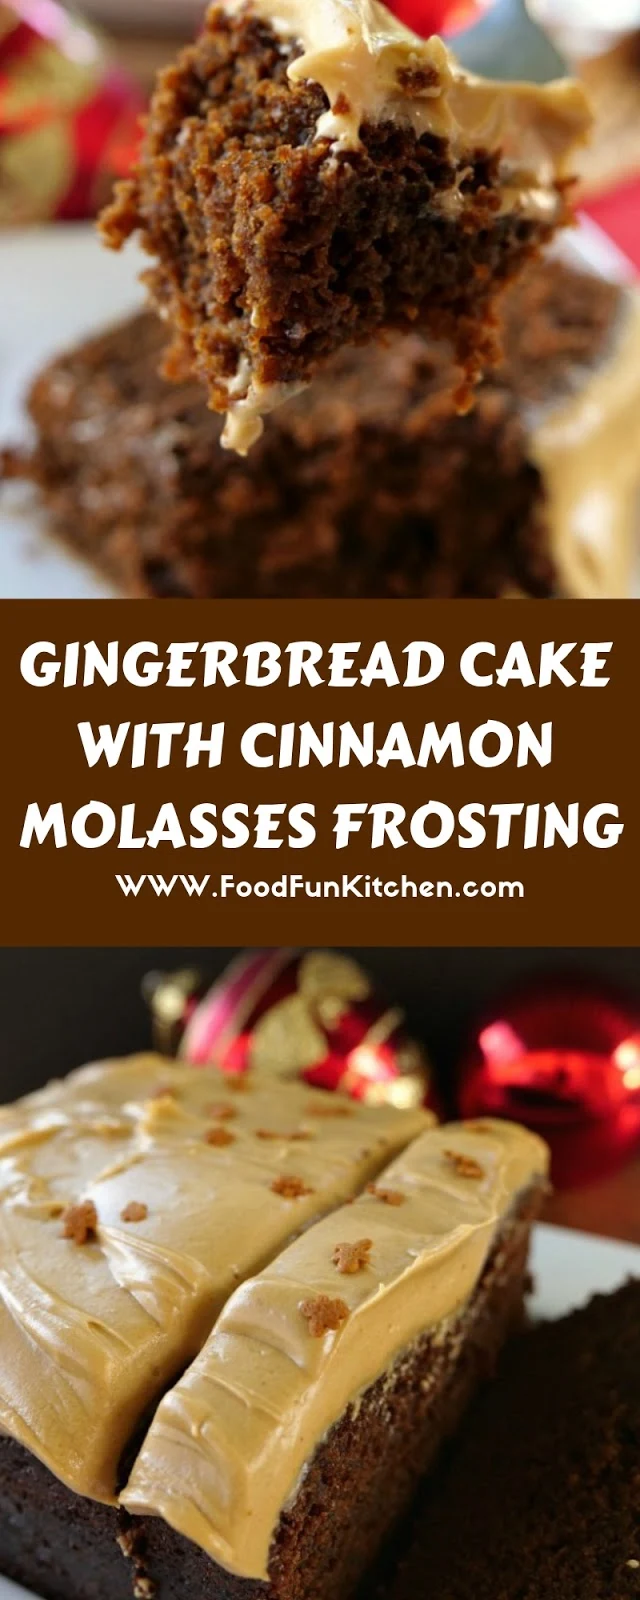 GINGERBREAD CAKE WITH CINNAMON MOLASSES FROSTING